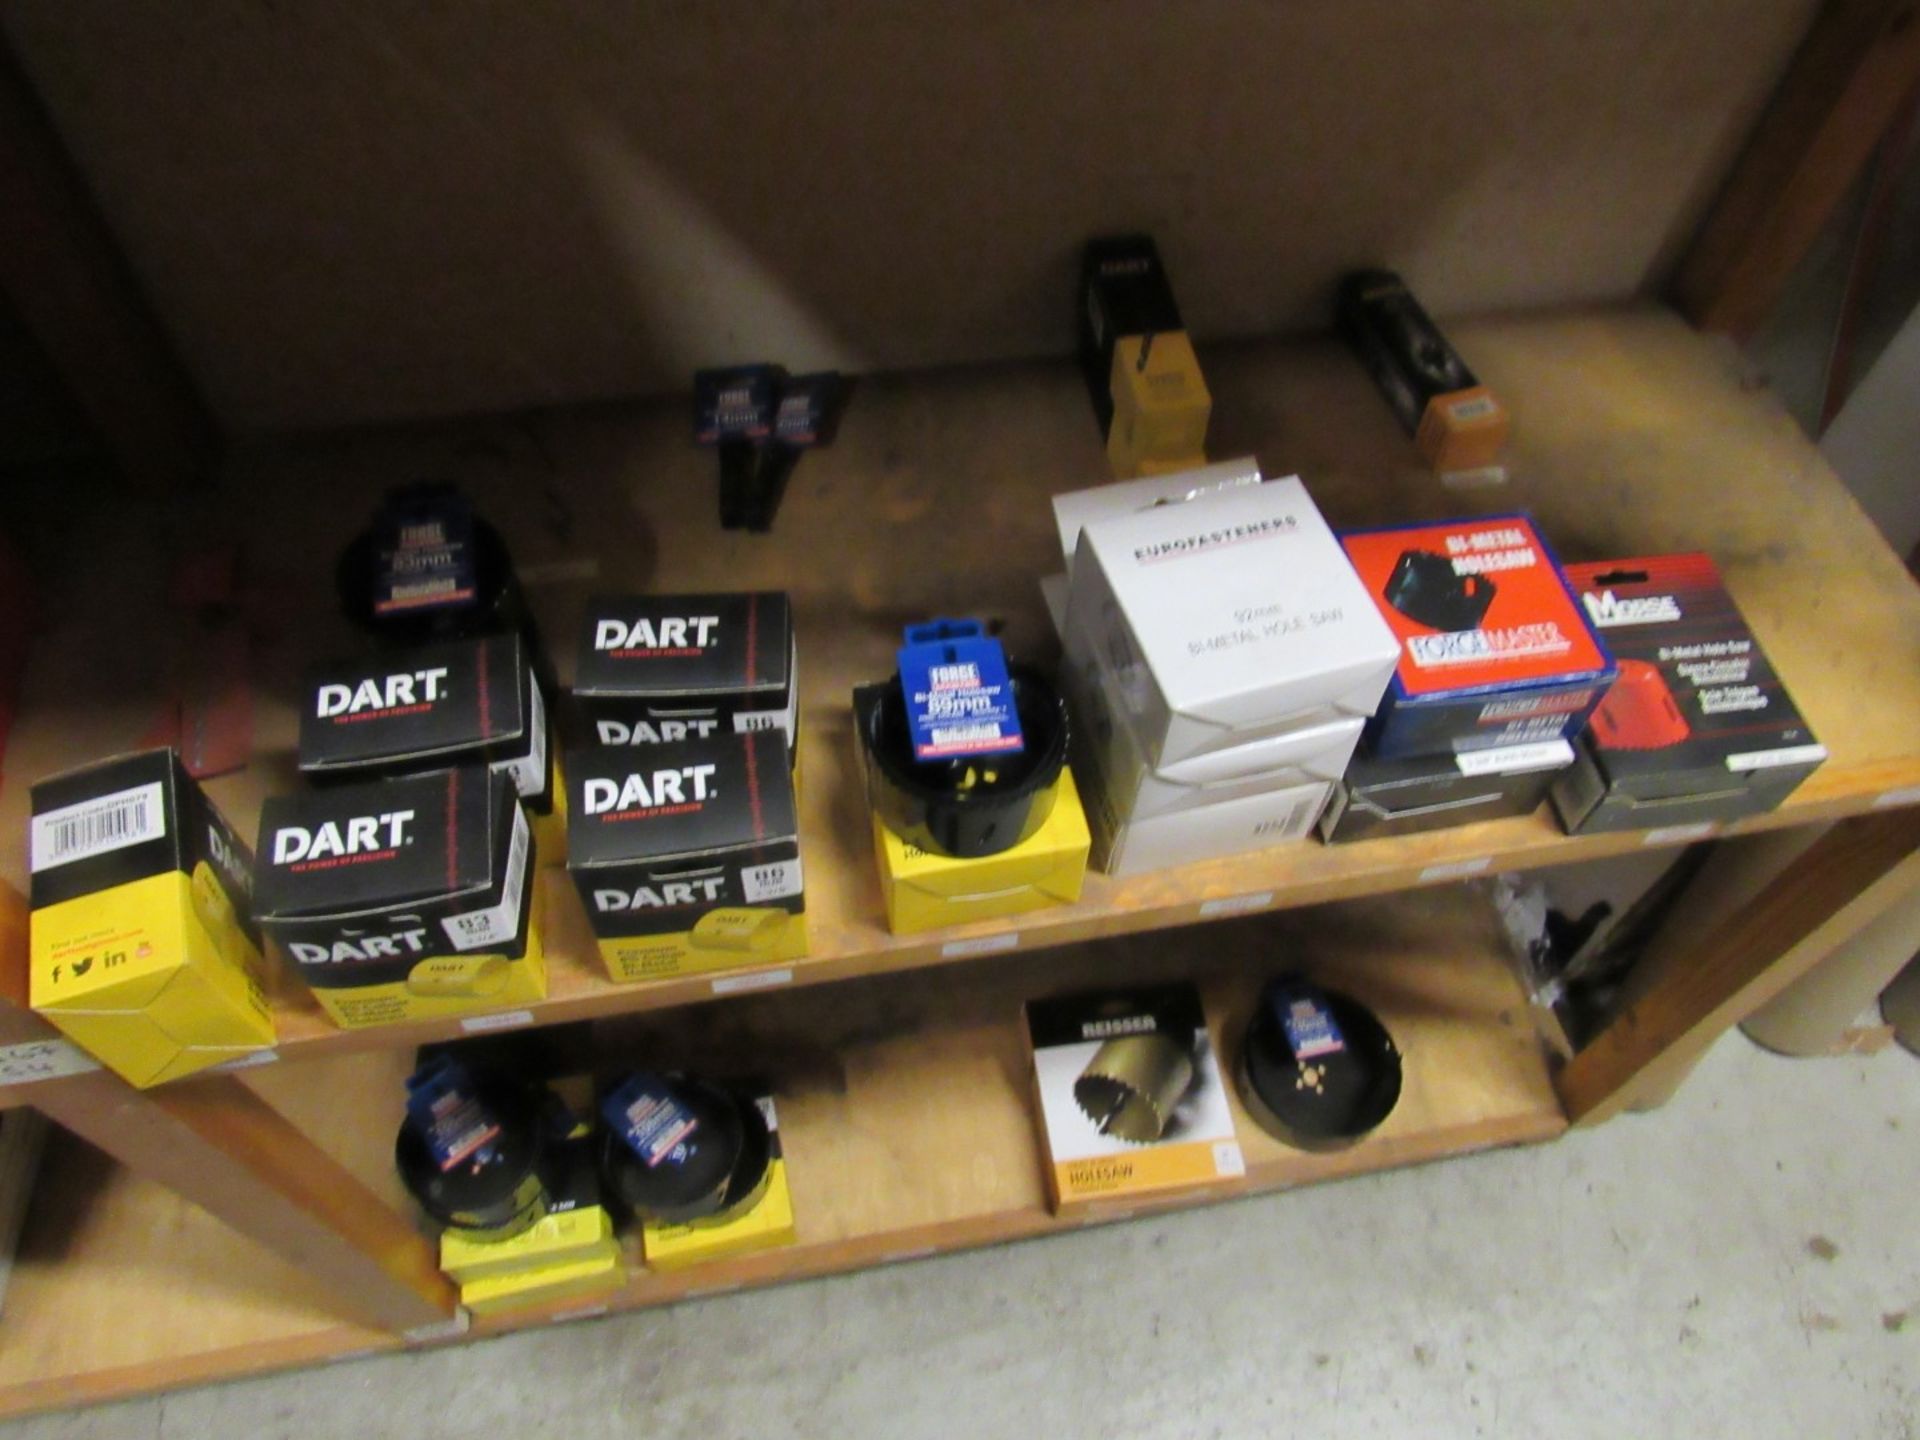 3 Bays of Wooden Shelving Units and Contents including hole saws, drill bits, driver bits etc - Image 3 of 4